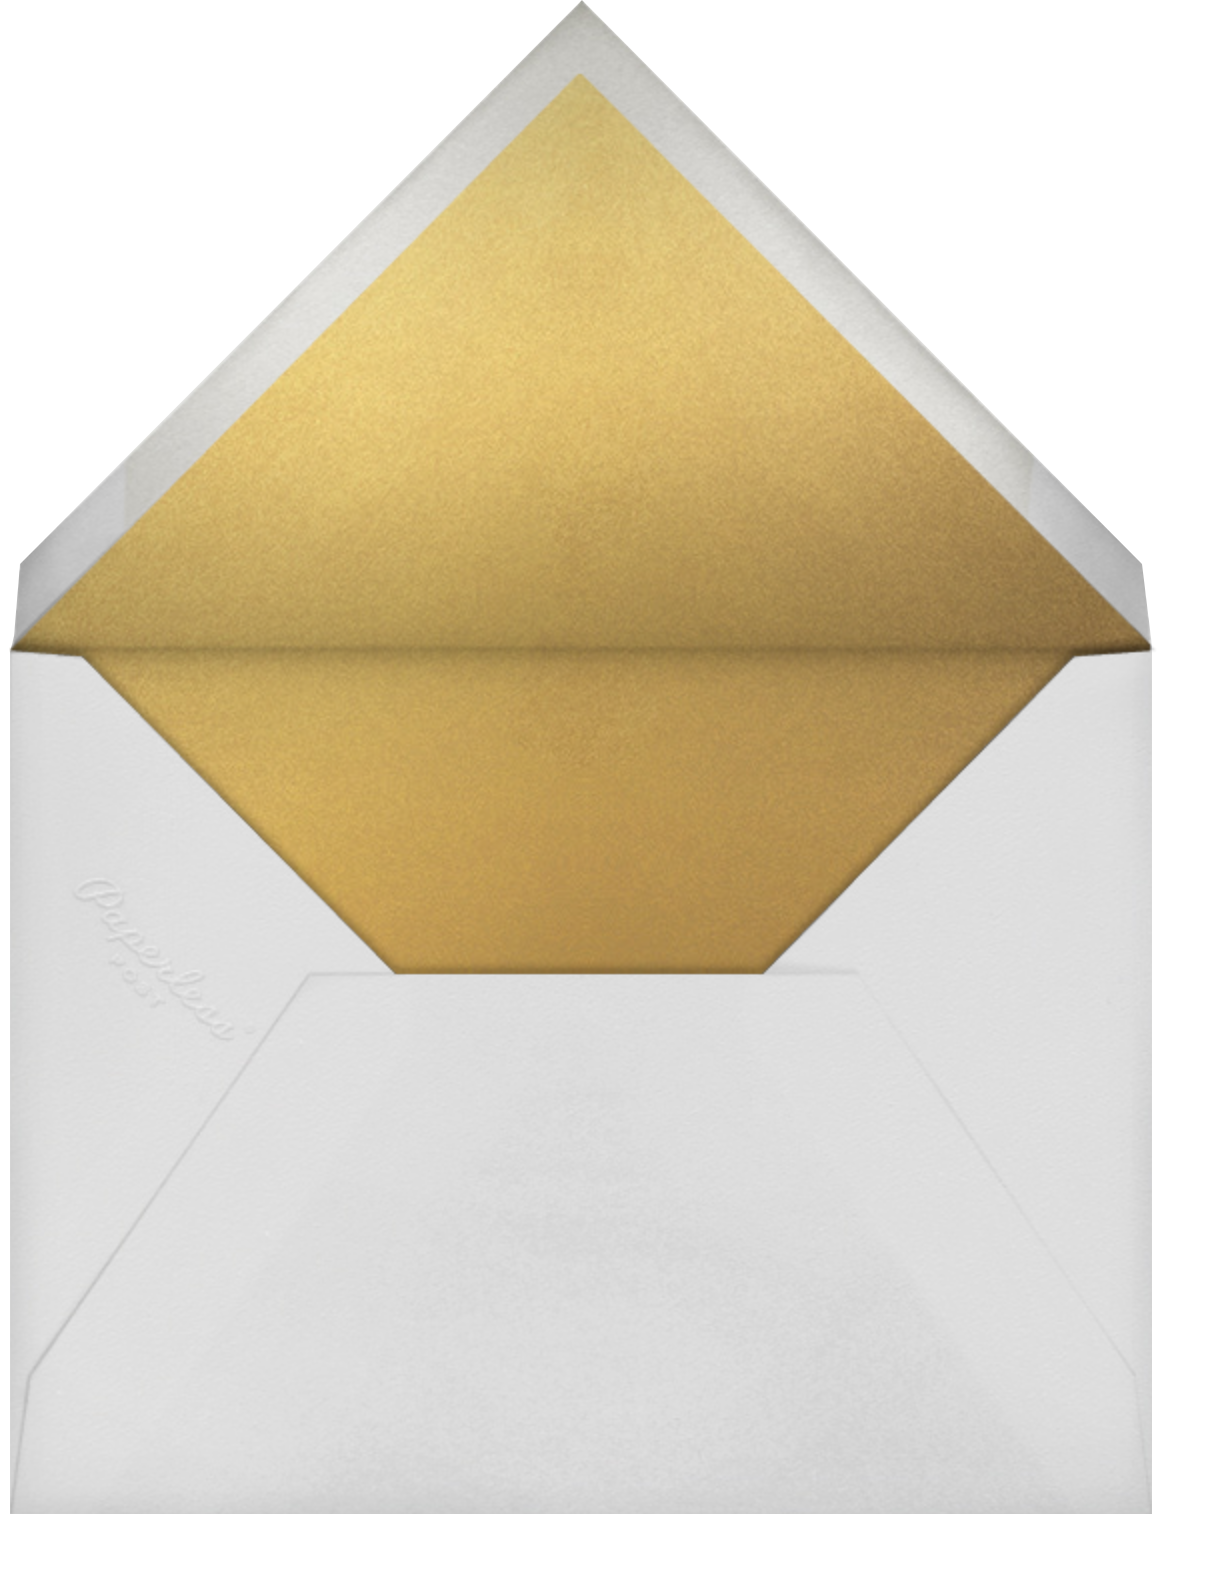 Won’t You Please - Navy - Paperless Post - Envelope